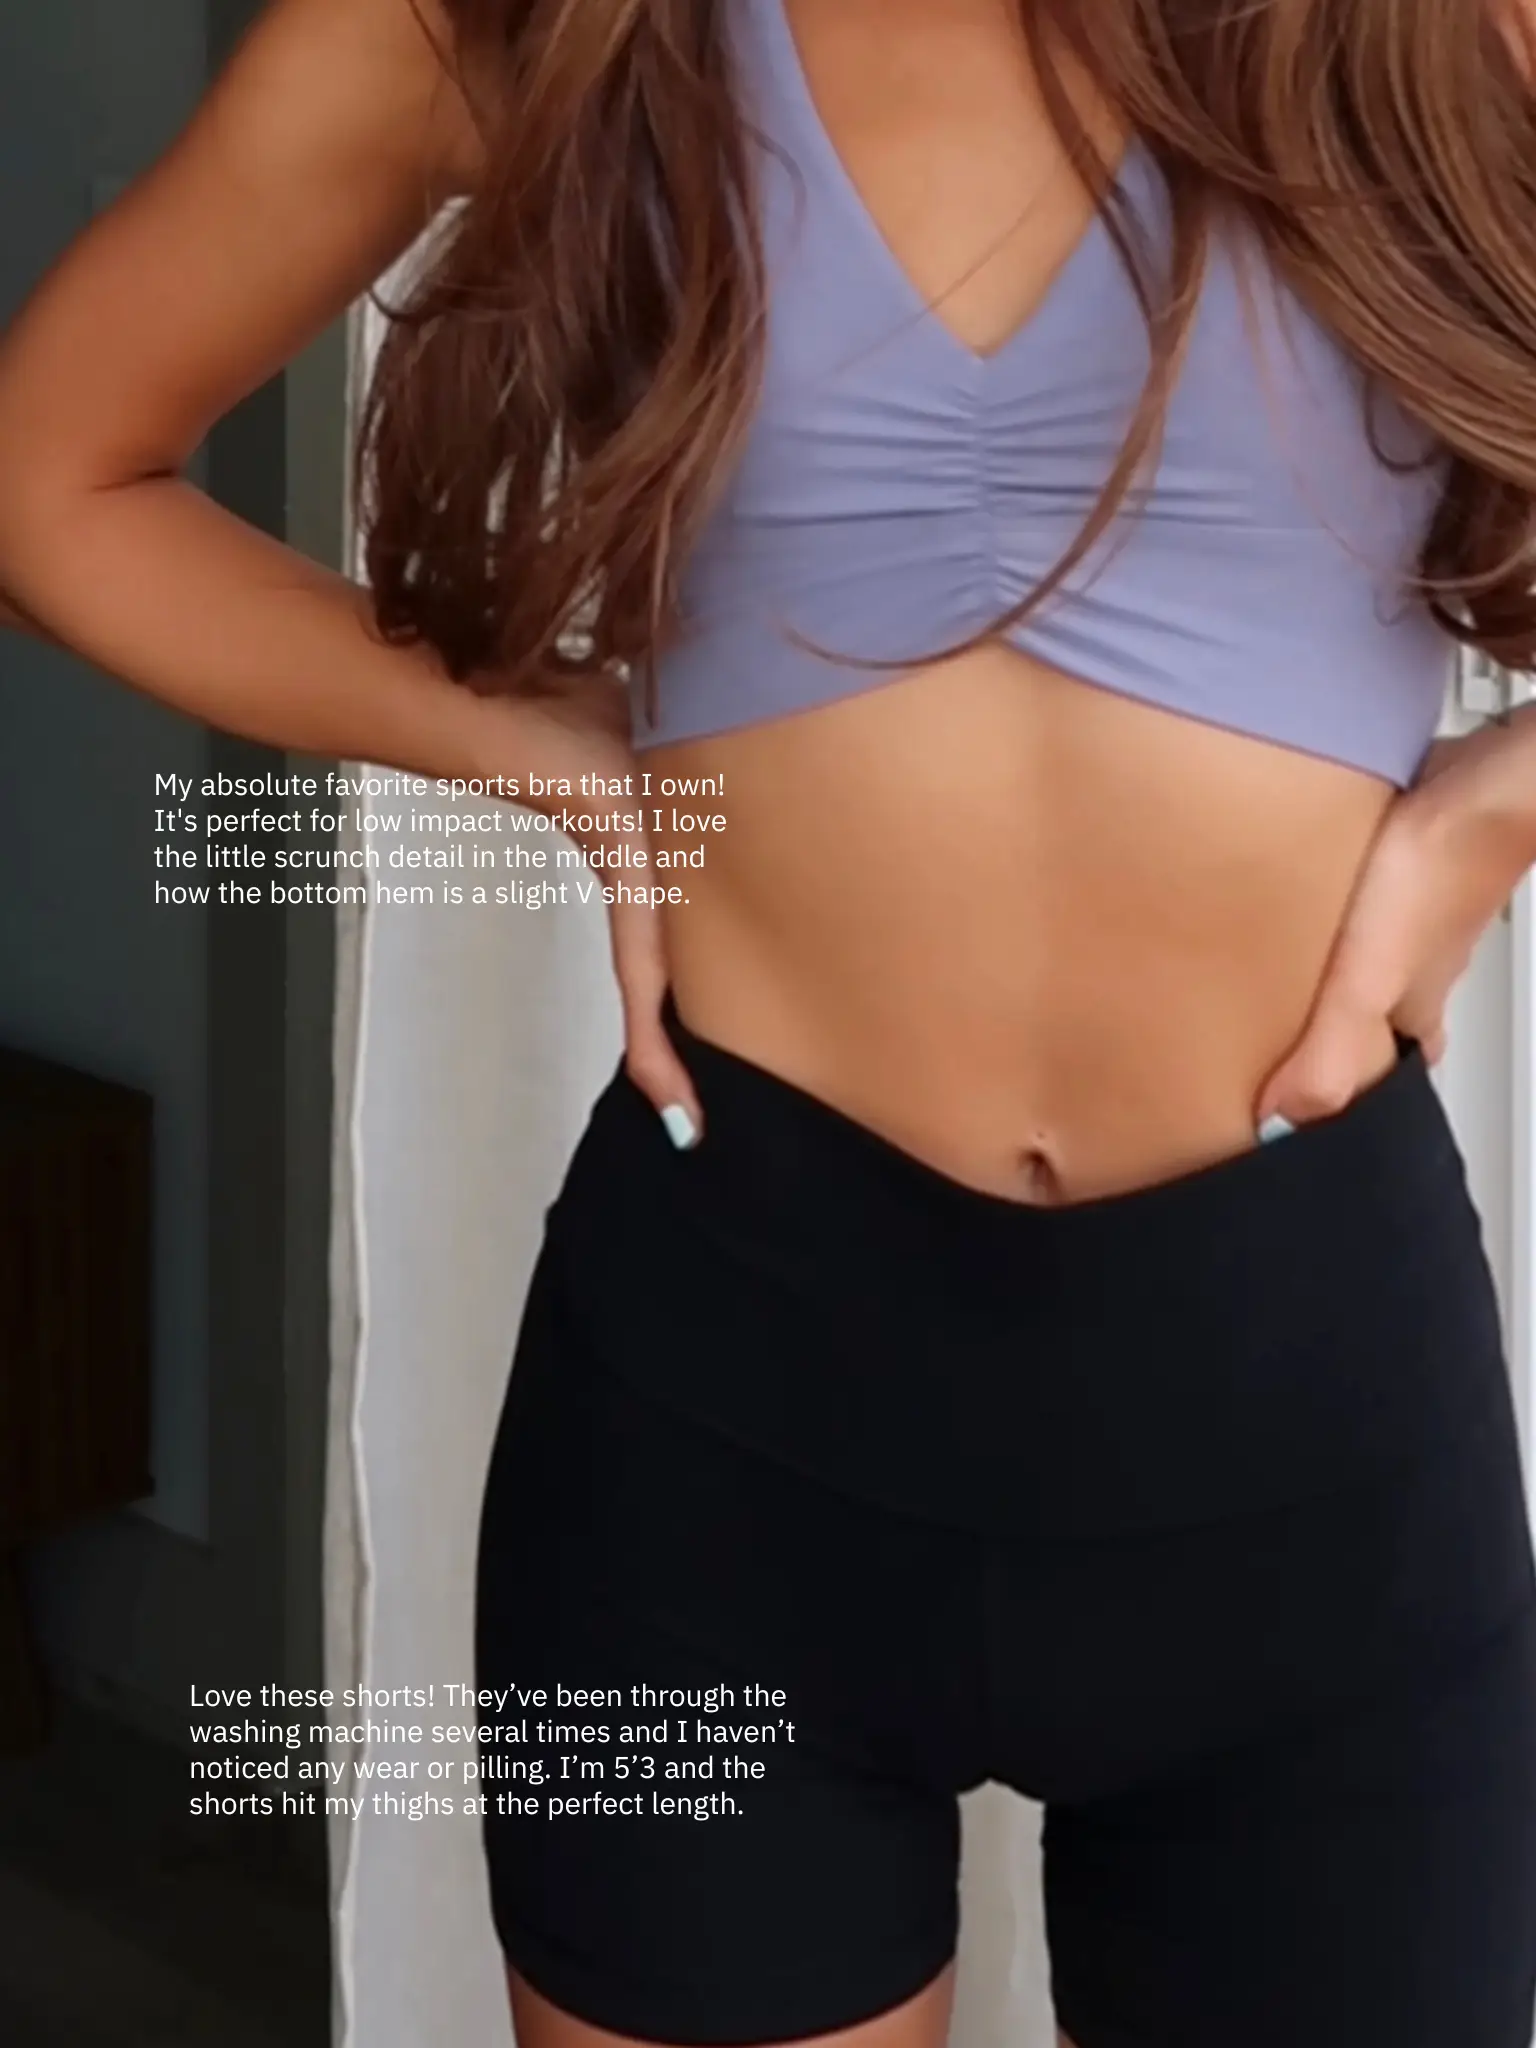 Next Move Sports Bra In Olive – Gina Marie's Brown Street Boutique